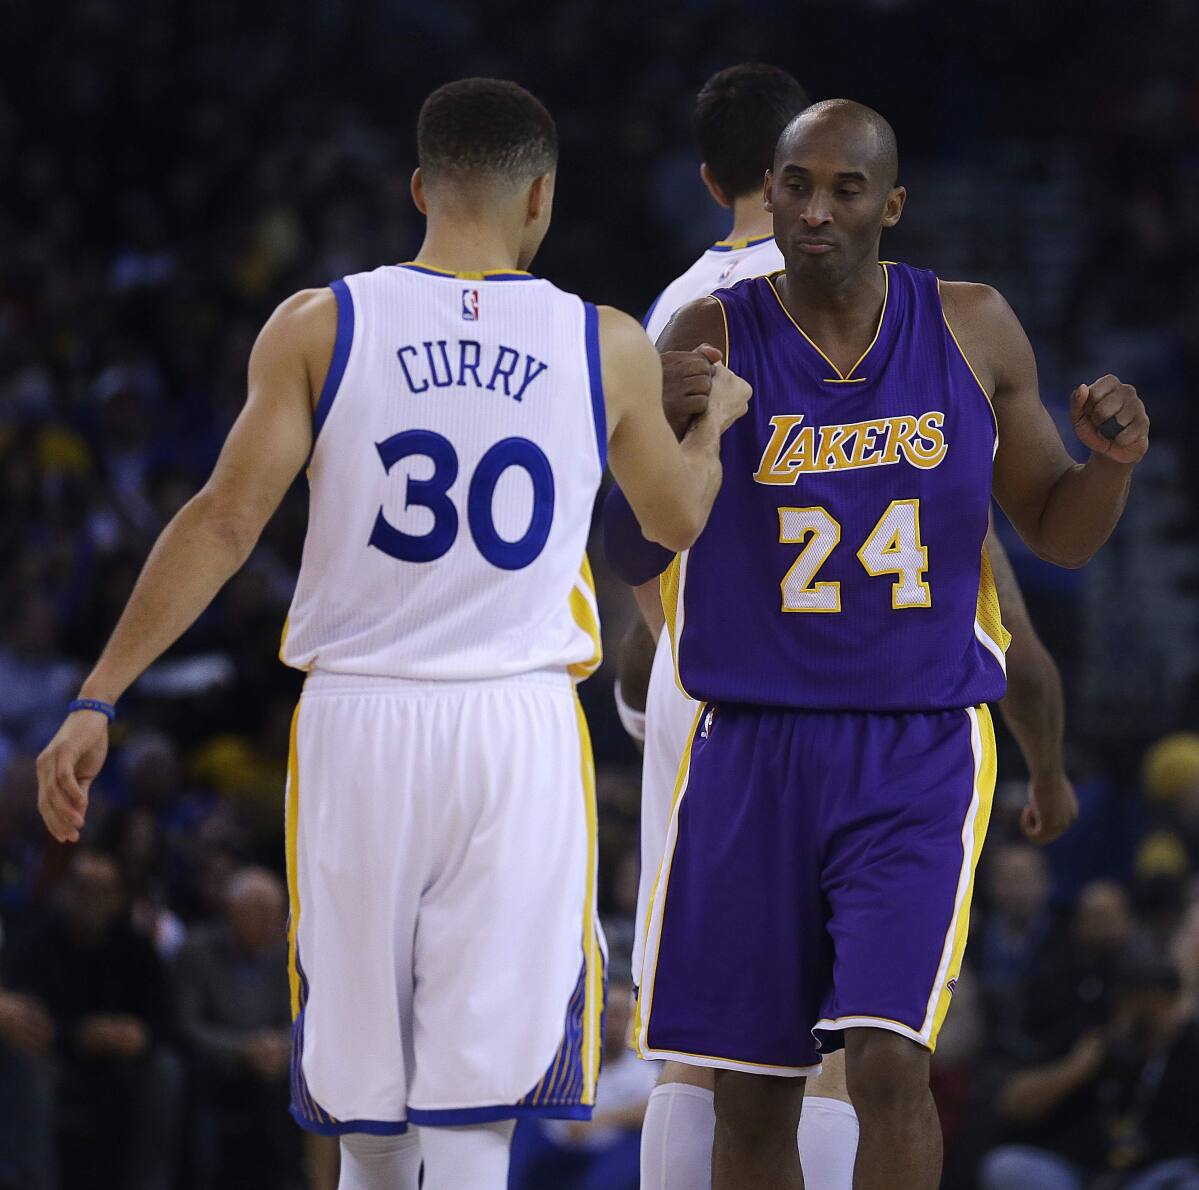 Warriors Defeat Lakers 116 98 In Kobe Bryant's Last Game At Oracle Arena